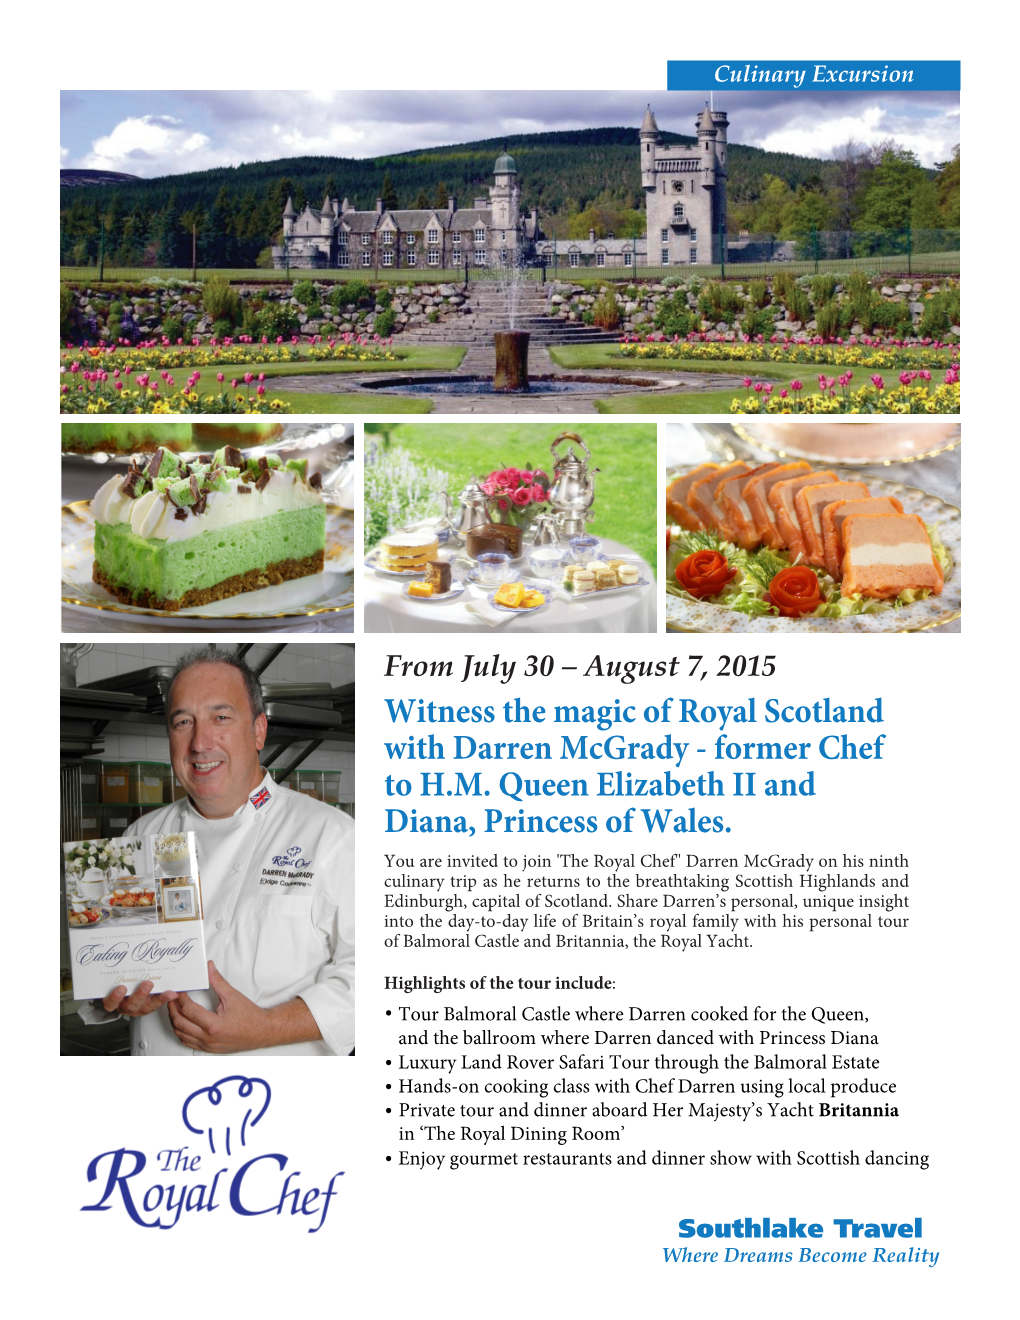 Witness the Magic of Royal Scotland with Darren Mcgrady - Former Chef to H.M